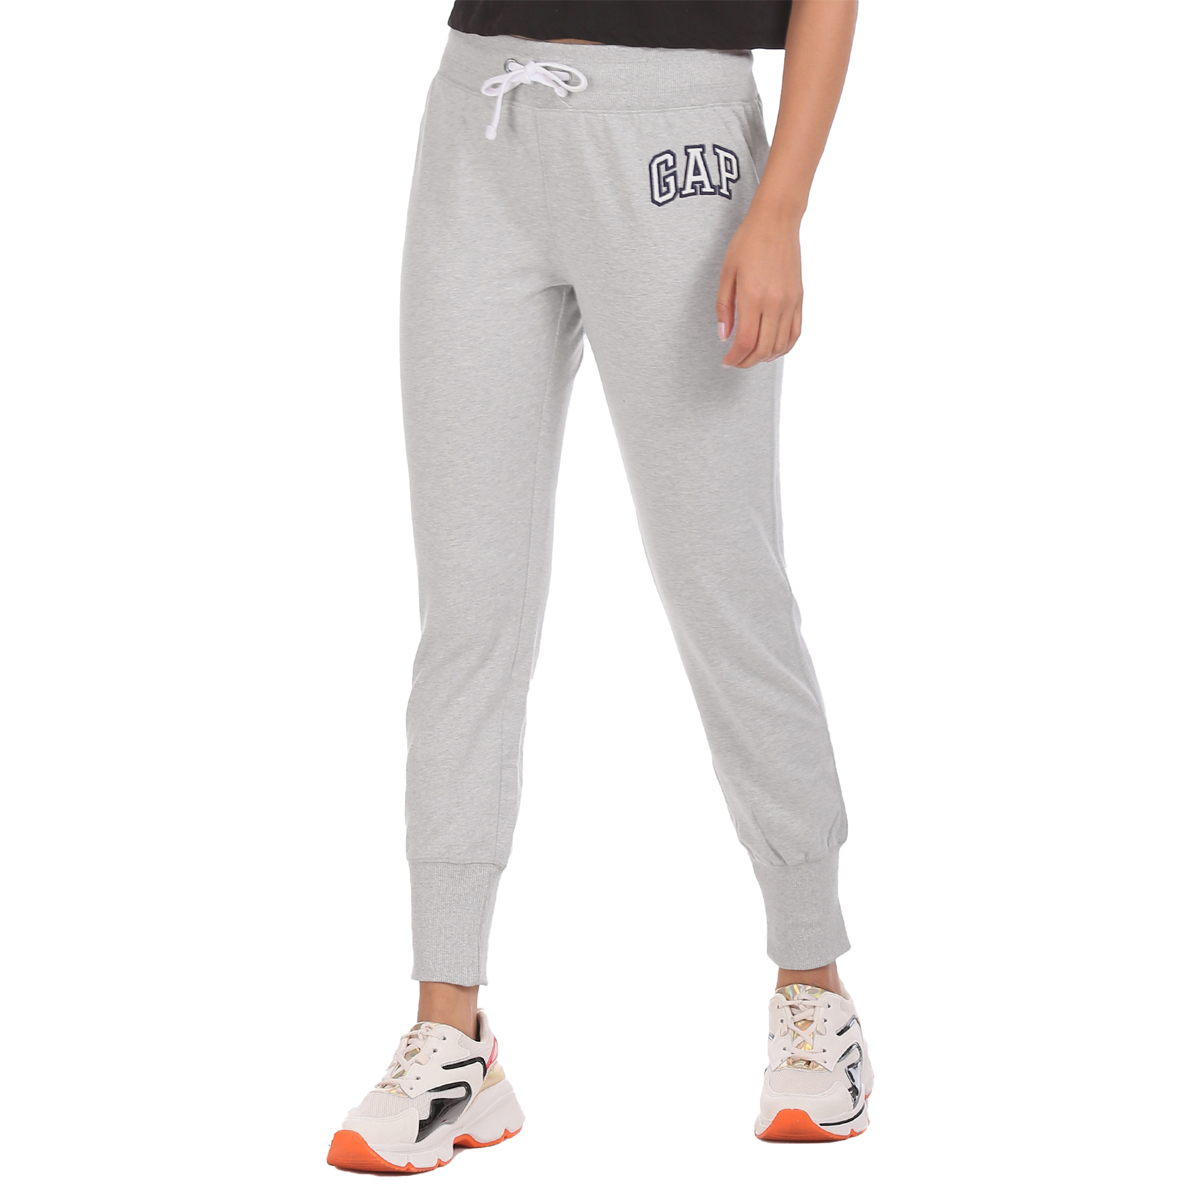 Gap Mid Rise Regular Fit Soft Cozy Fleece Knitted Solid Color Jogger Styled with Applique Worked Logo - Lt. Grey